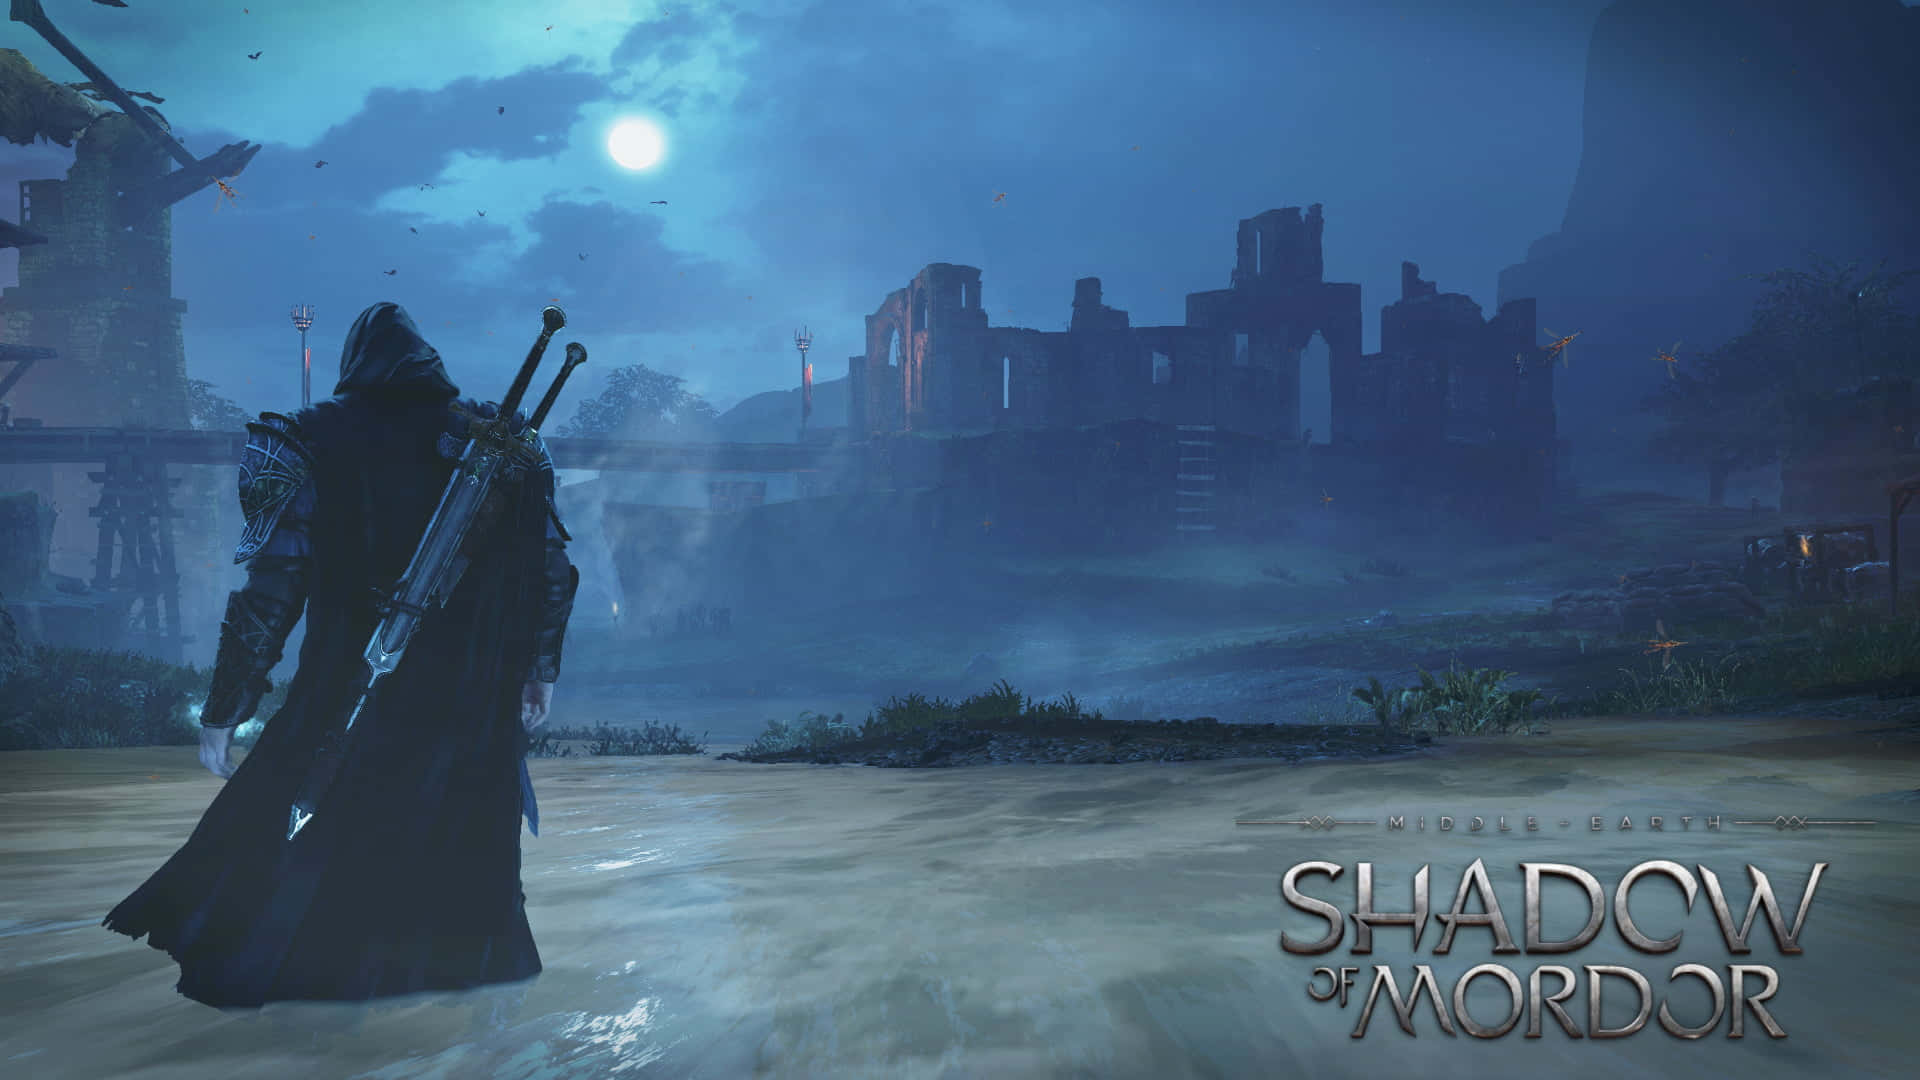 Explore Mordor and fight enemies in the blockbuster game, Shadow of Mordor.